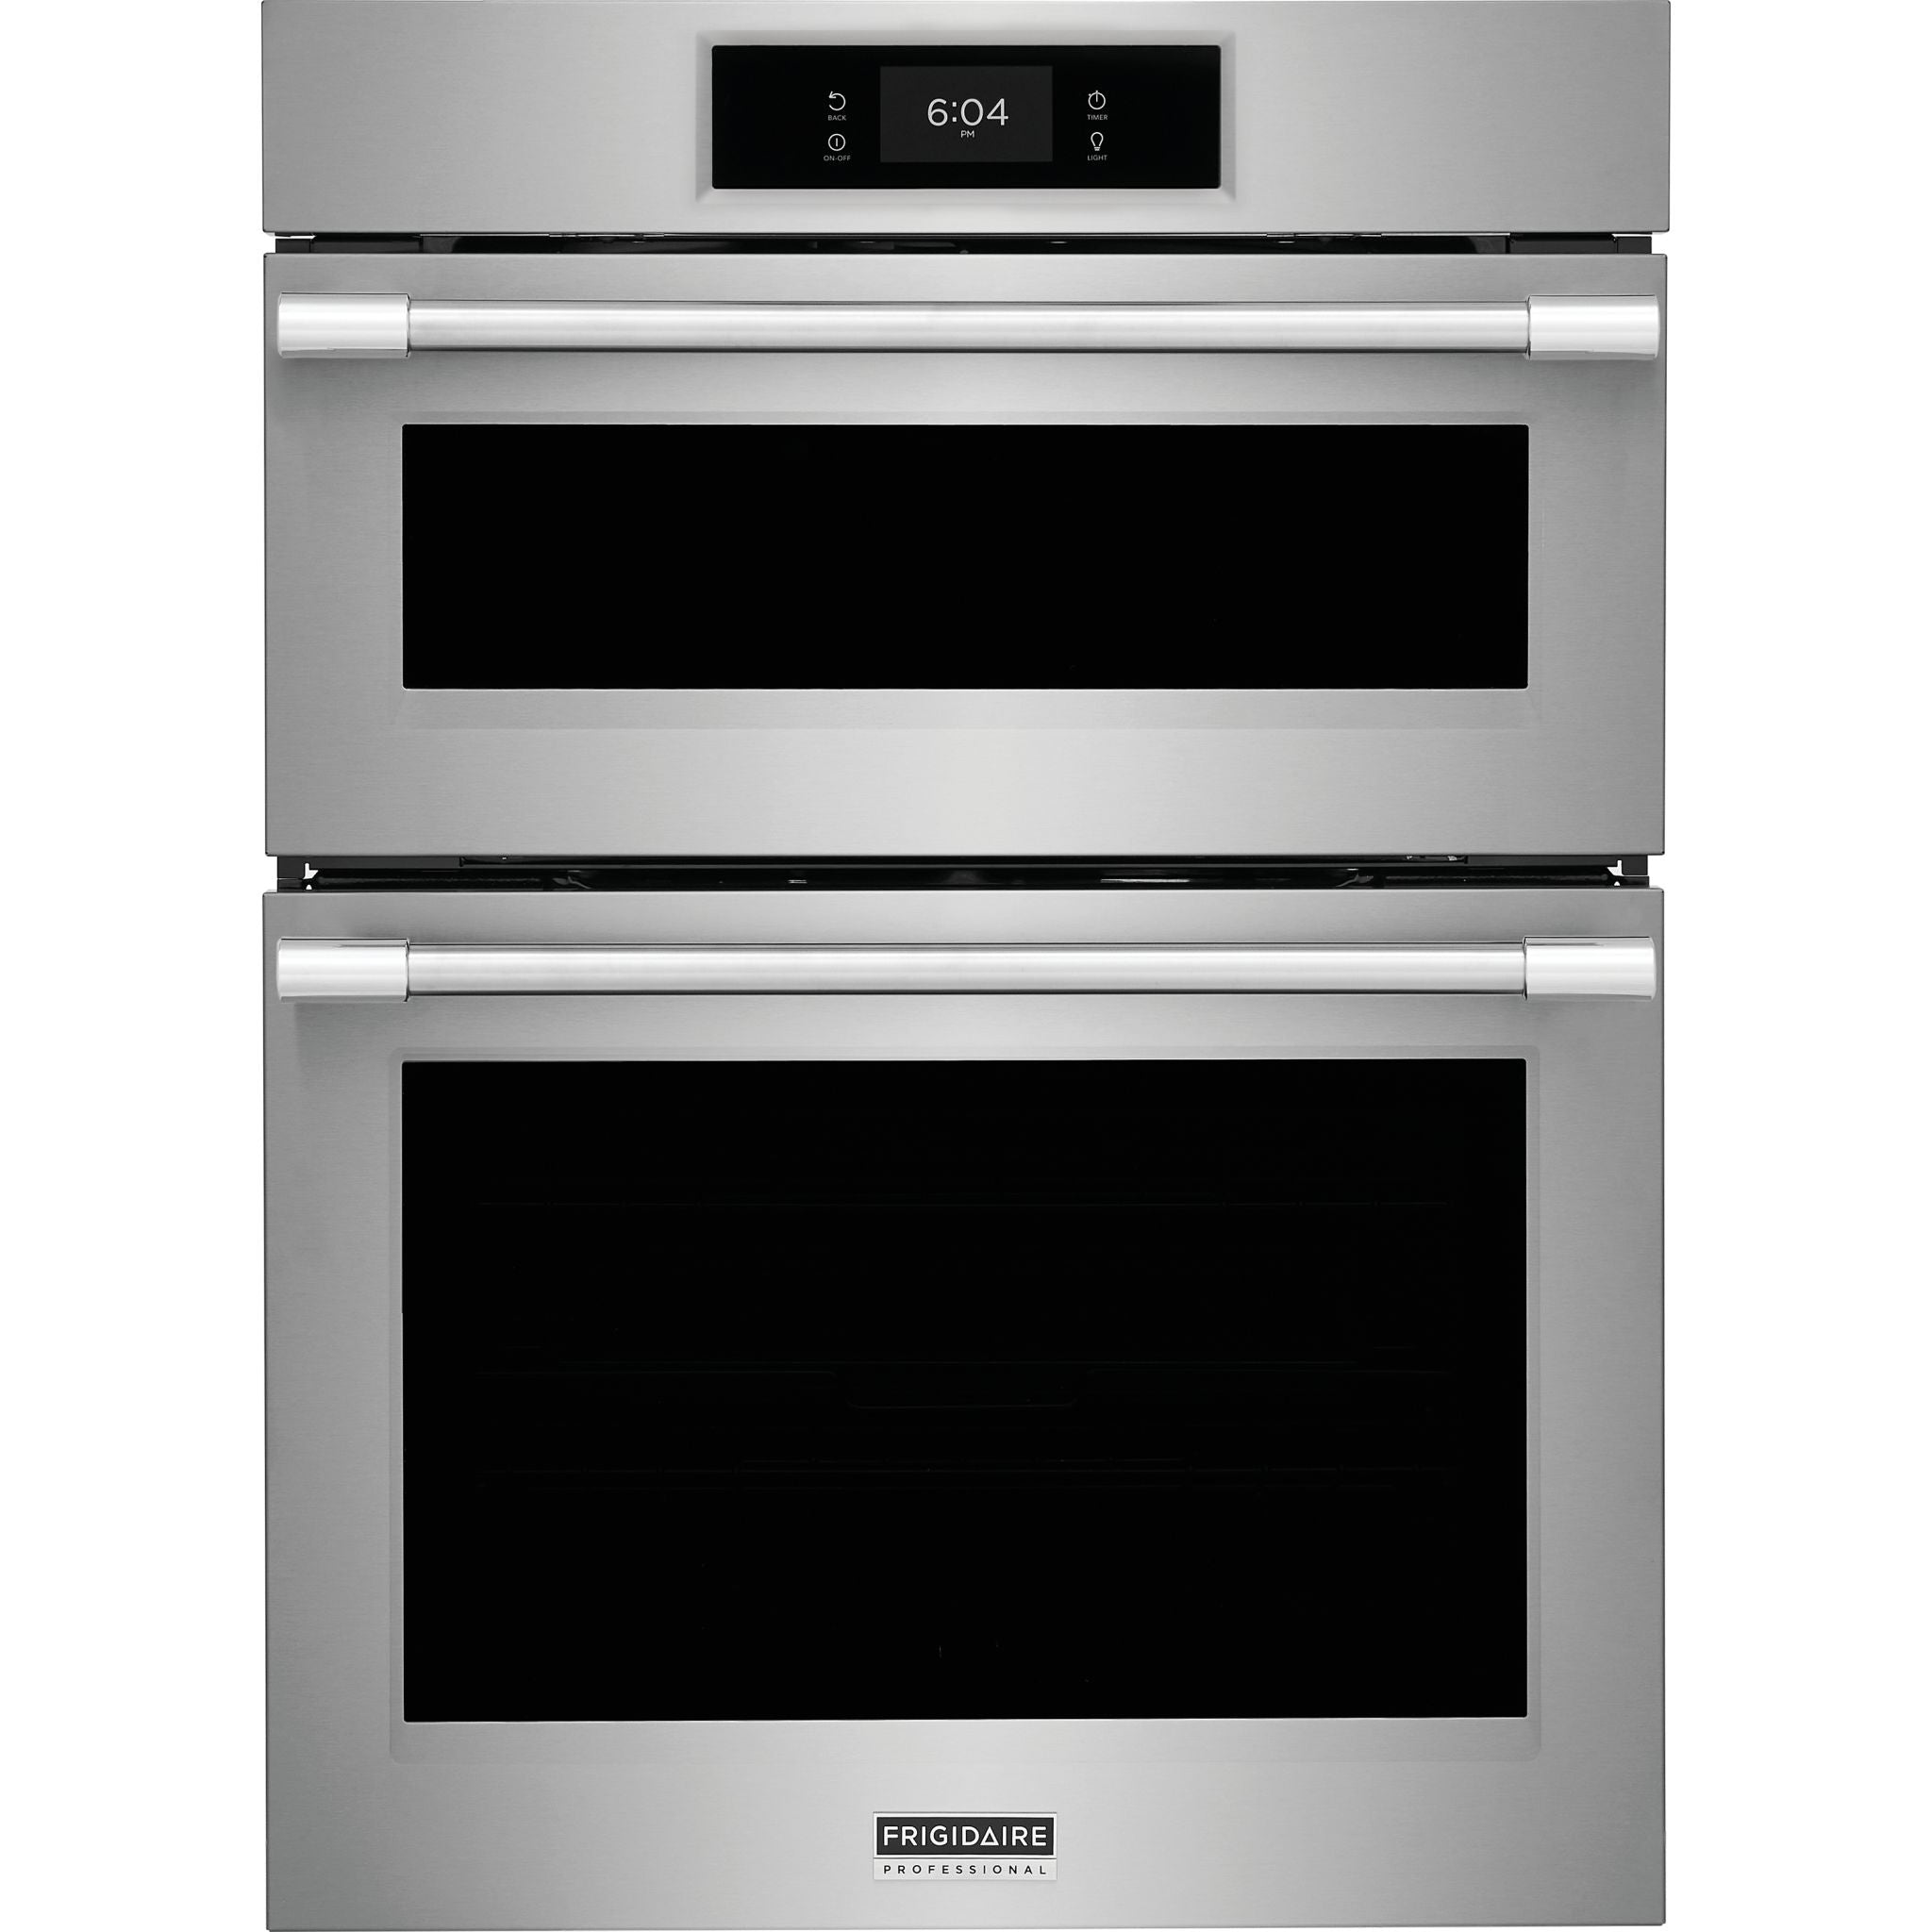 Frigidaire Professional, Frigidaire Professional 30" Microwave/Wall Oven (PCWM3080AF) - Stainless Steel